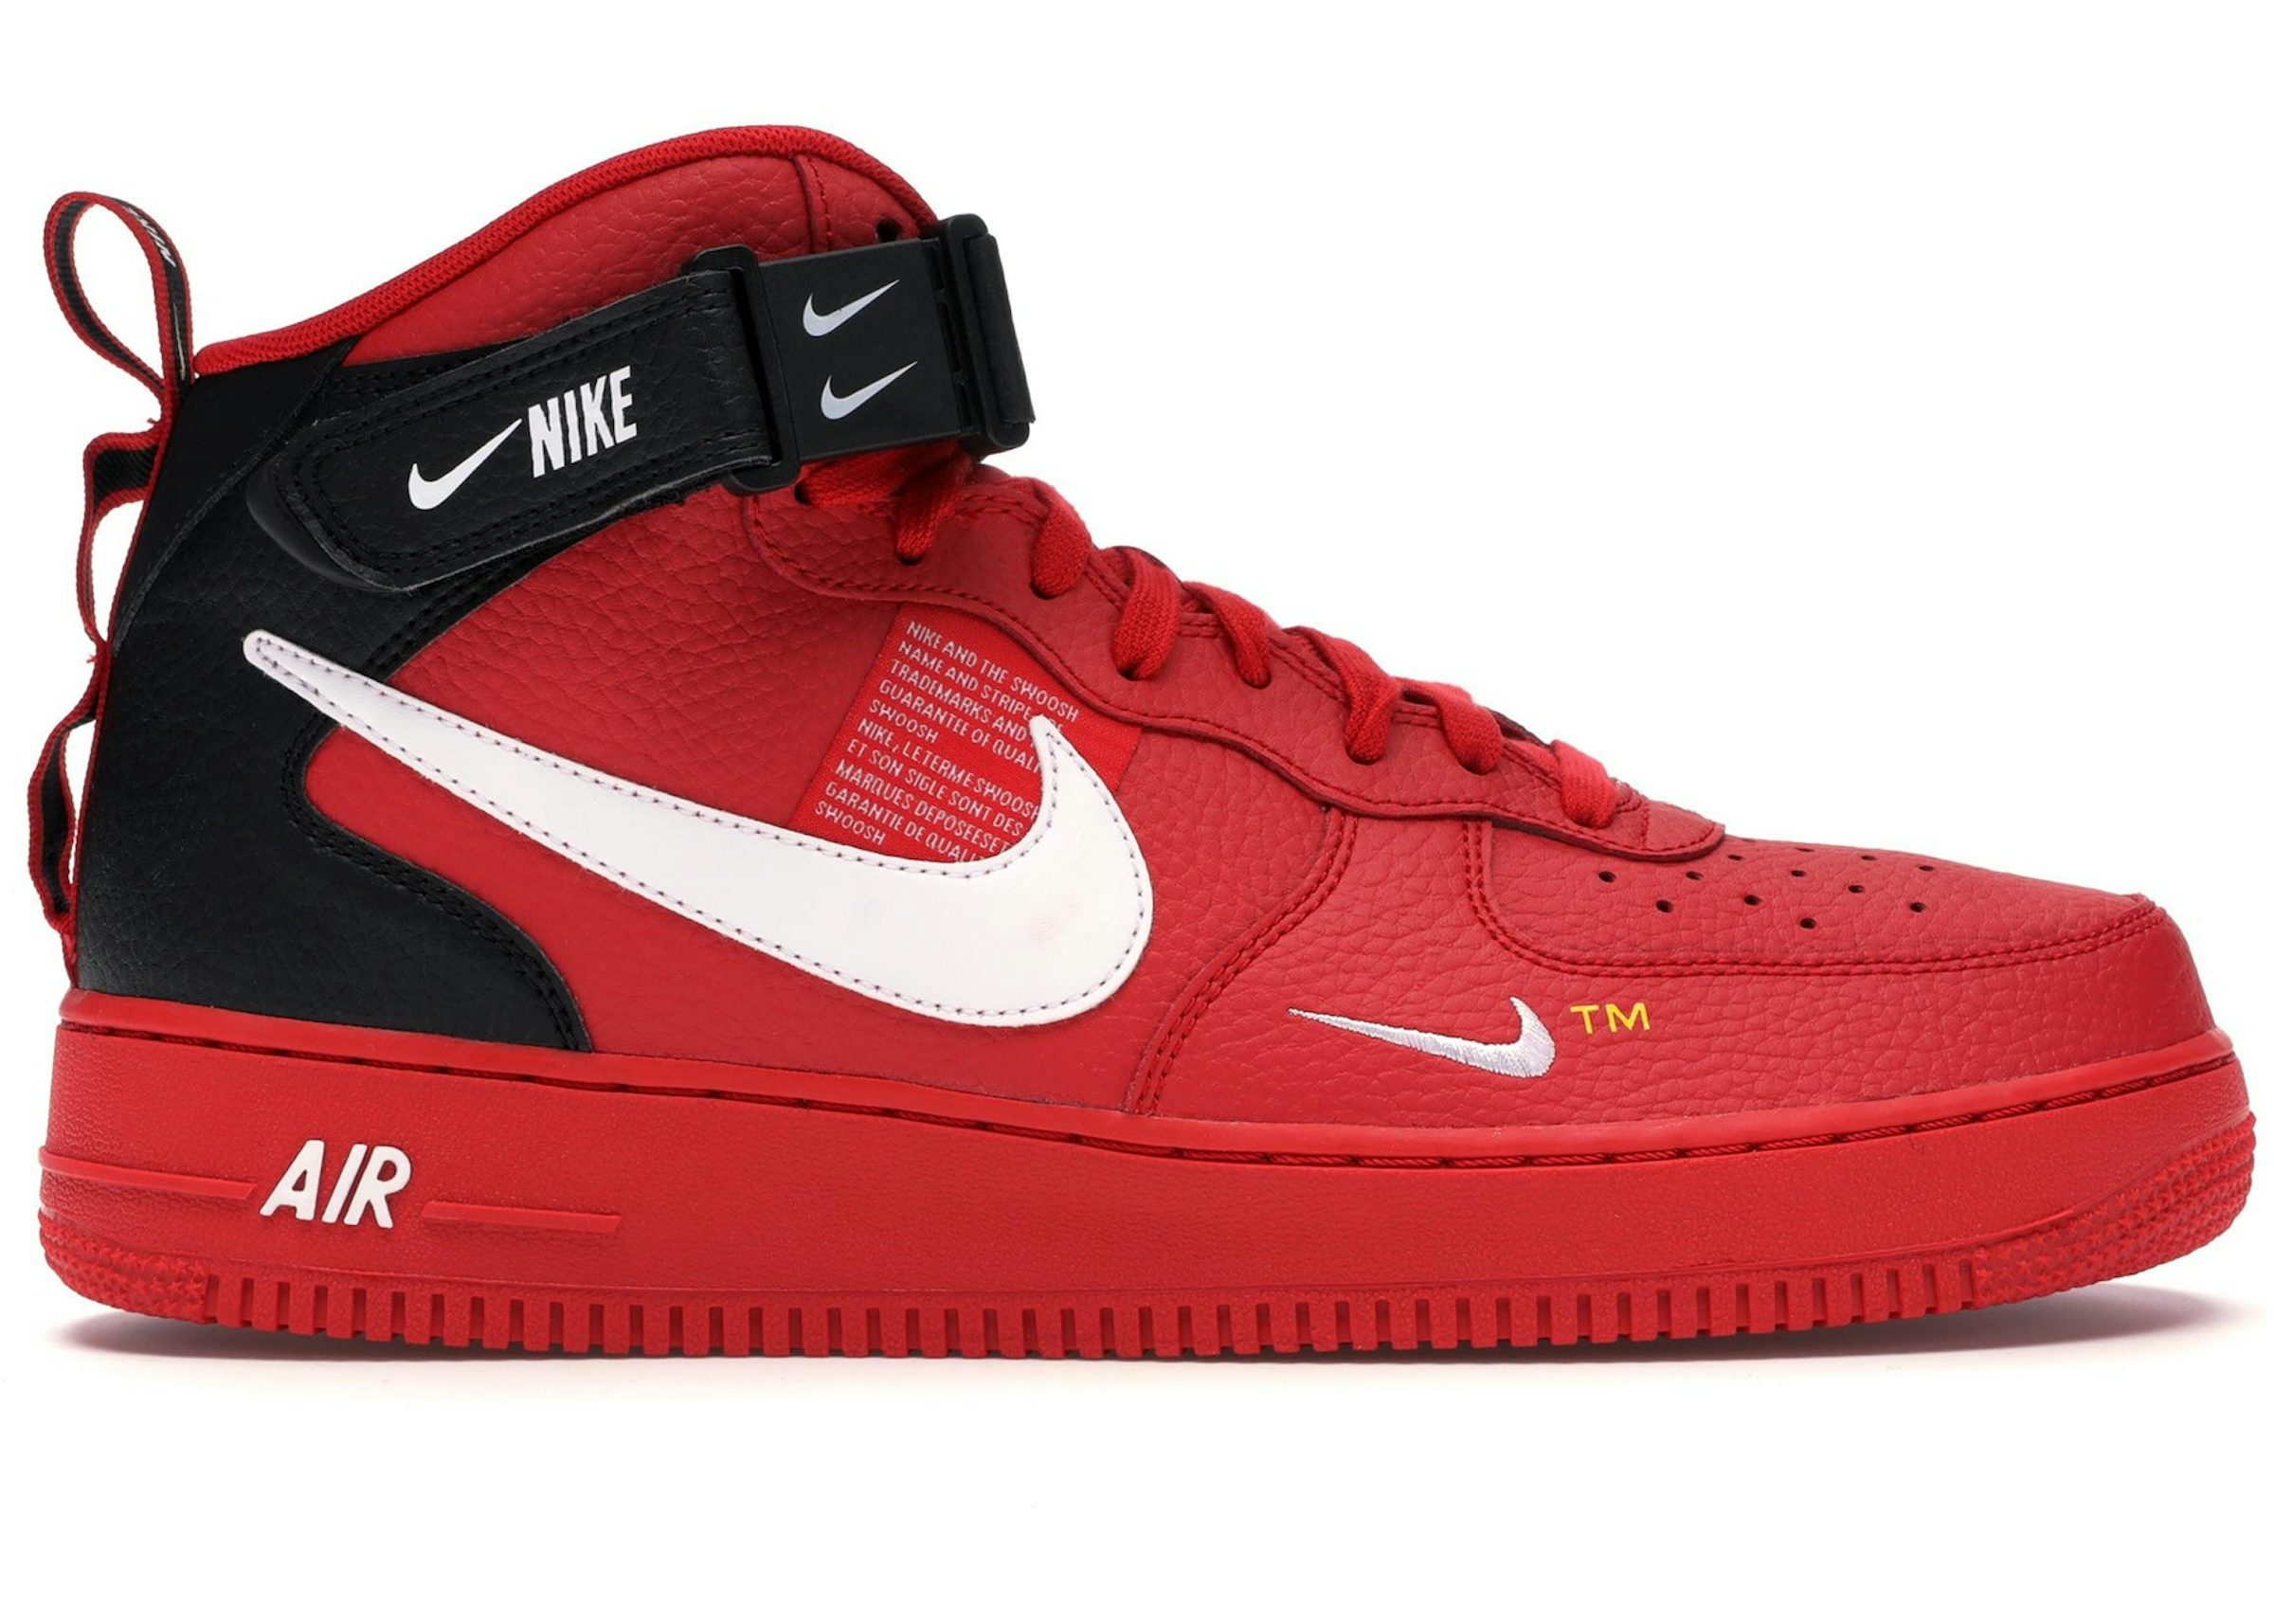 nike air force 1 af-1 '82 Red White And Blue 6.5 Y